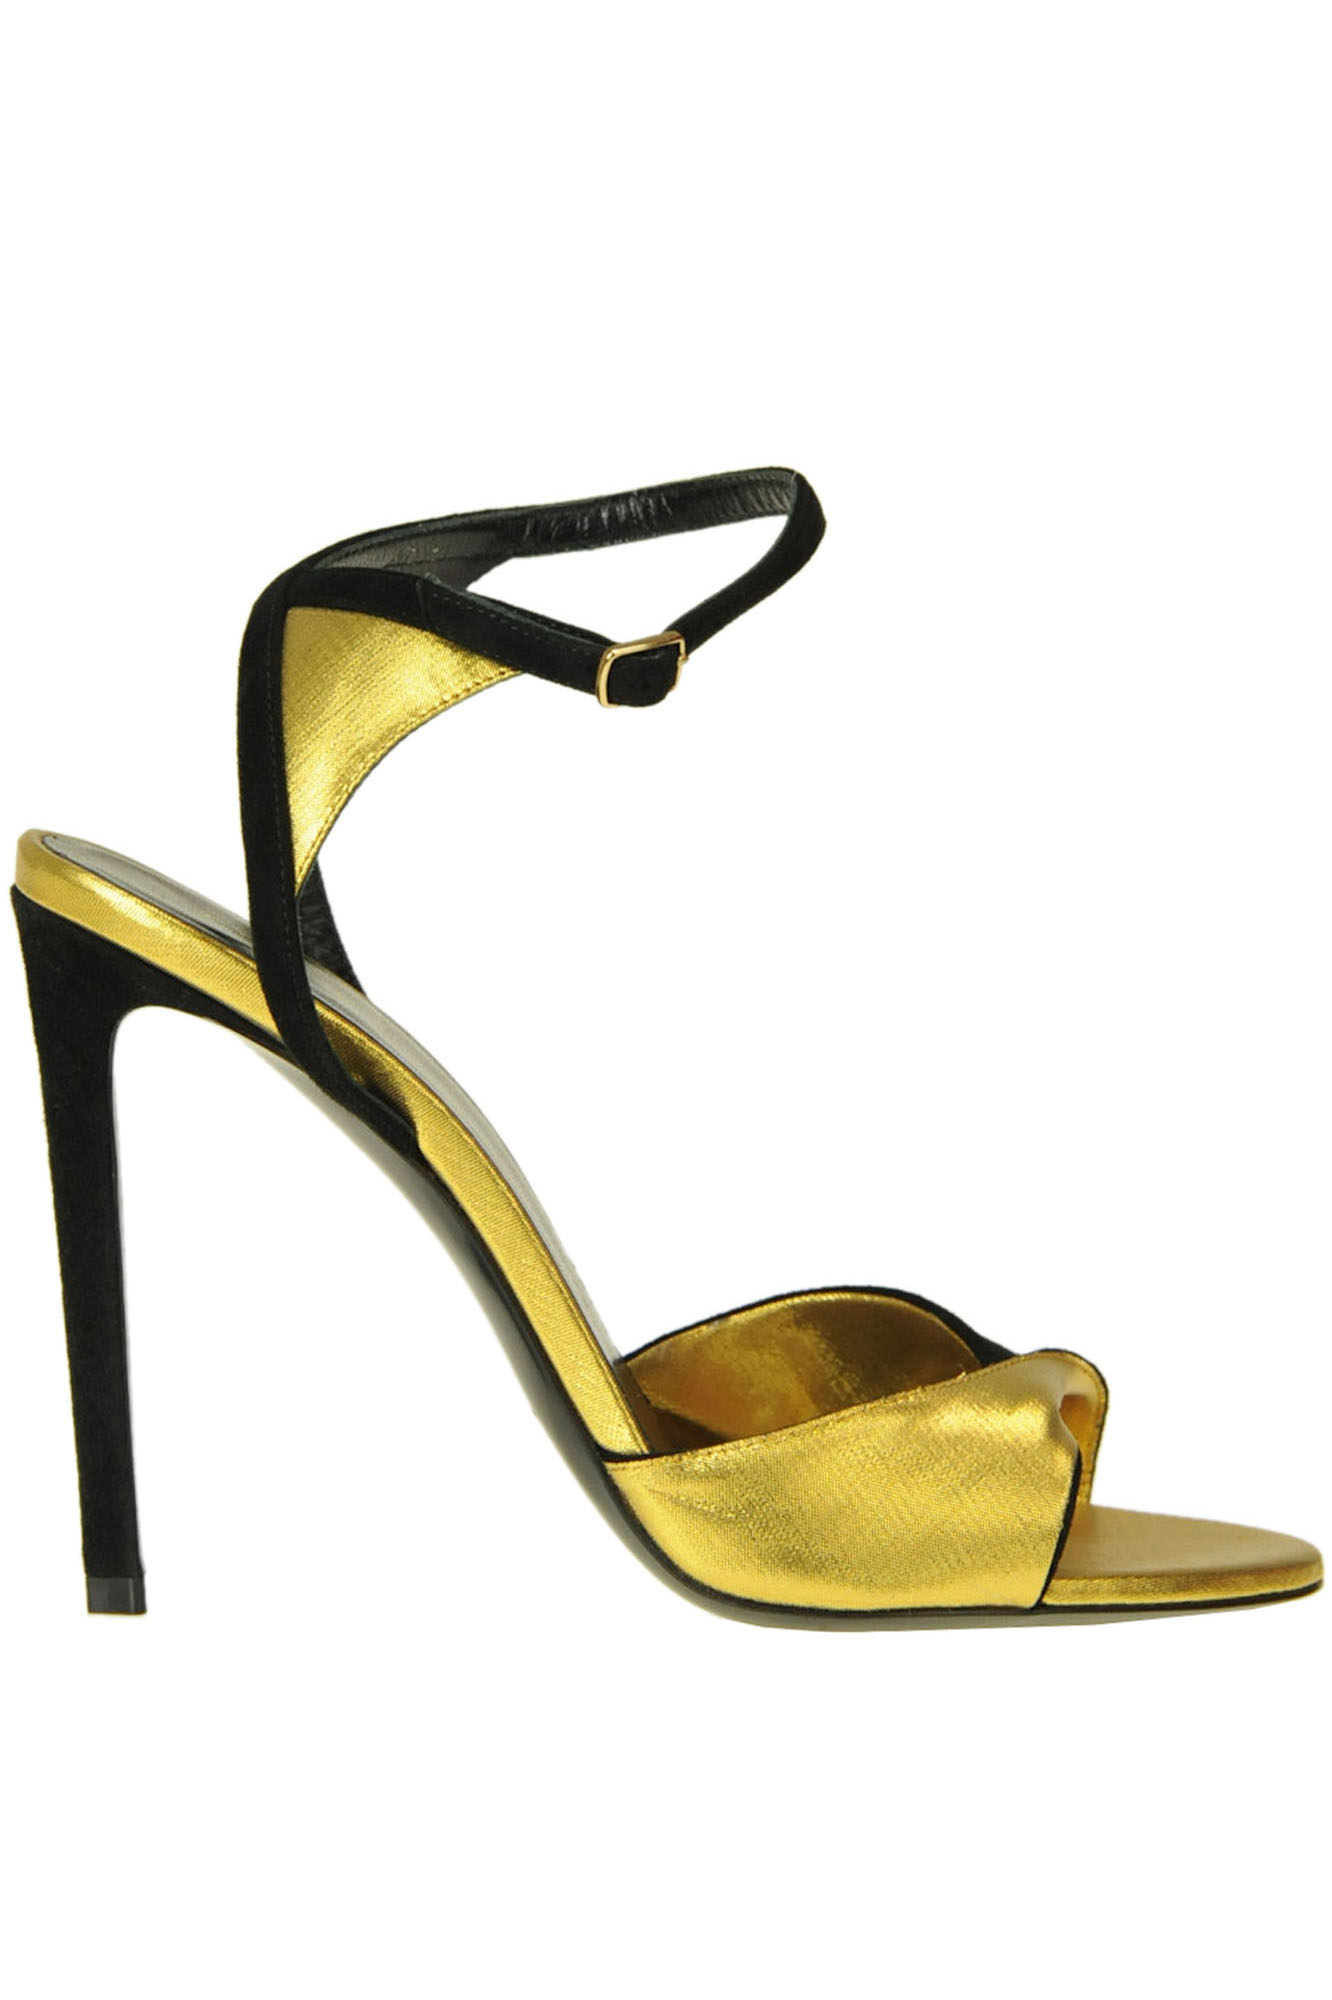 CELINE SUEDE AND METALLIC EFFECT FABRIC SANDALS